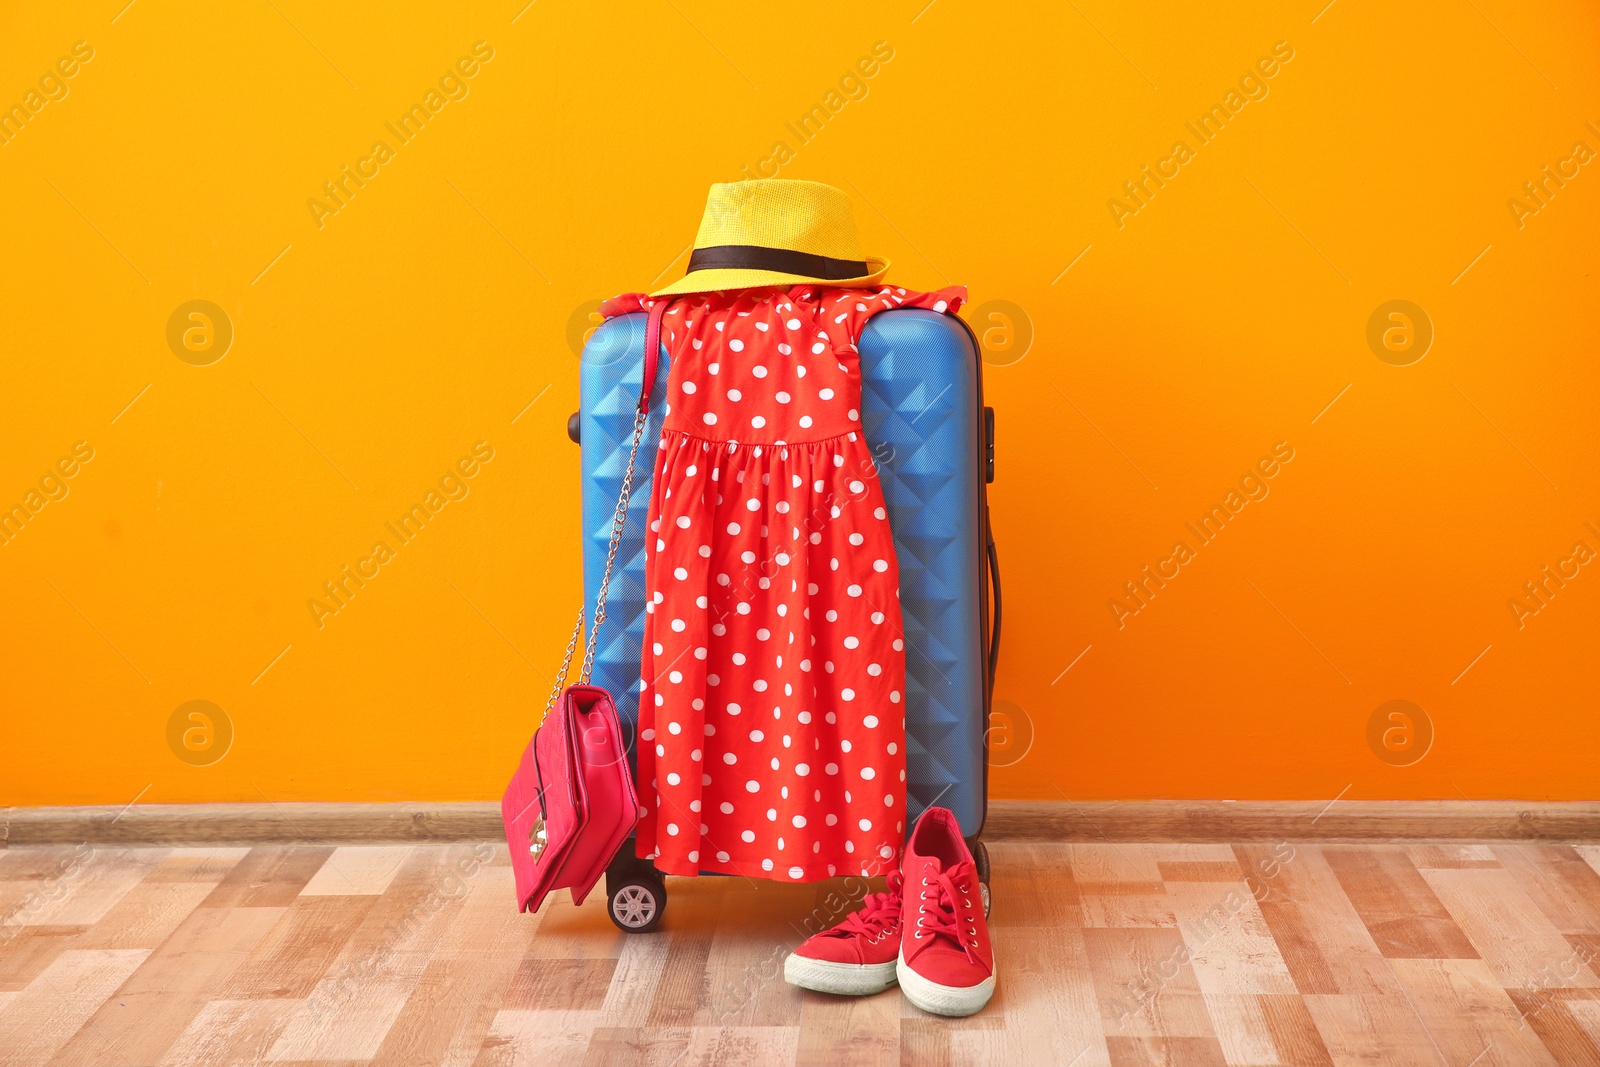 Photo of Packed suitcase, dress and shoes prepared for summer journey on floor near color wall